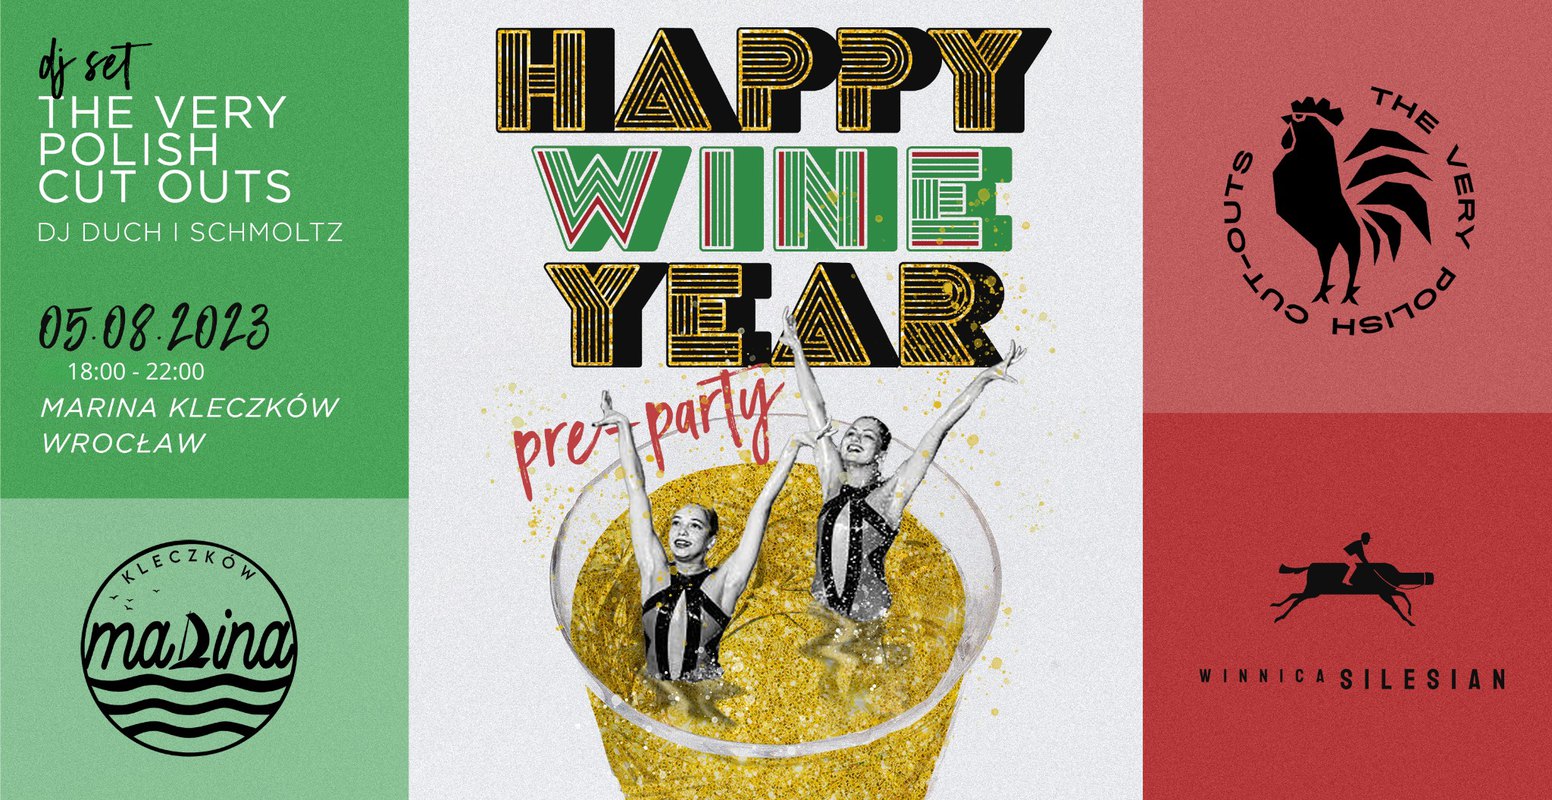 The Very Polish Cut Outs / Happy Wine Year pre-party